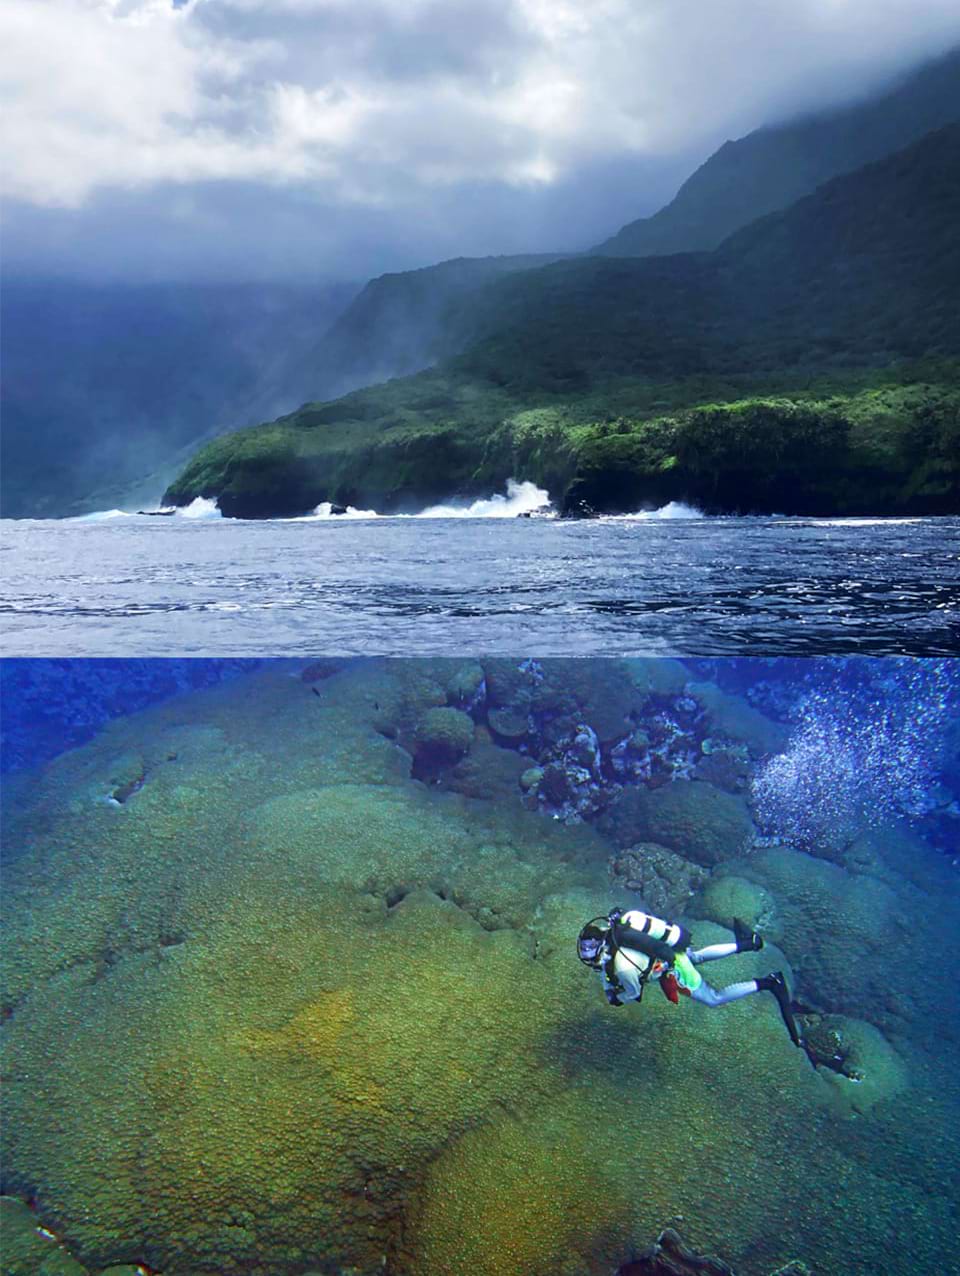 Taʻū (top) is the easternmost volcanic island of the Samoan Islands. It is home to some of the world's largest corals (bottom). (Credit: Ray Boland/NOAA Fisheries)